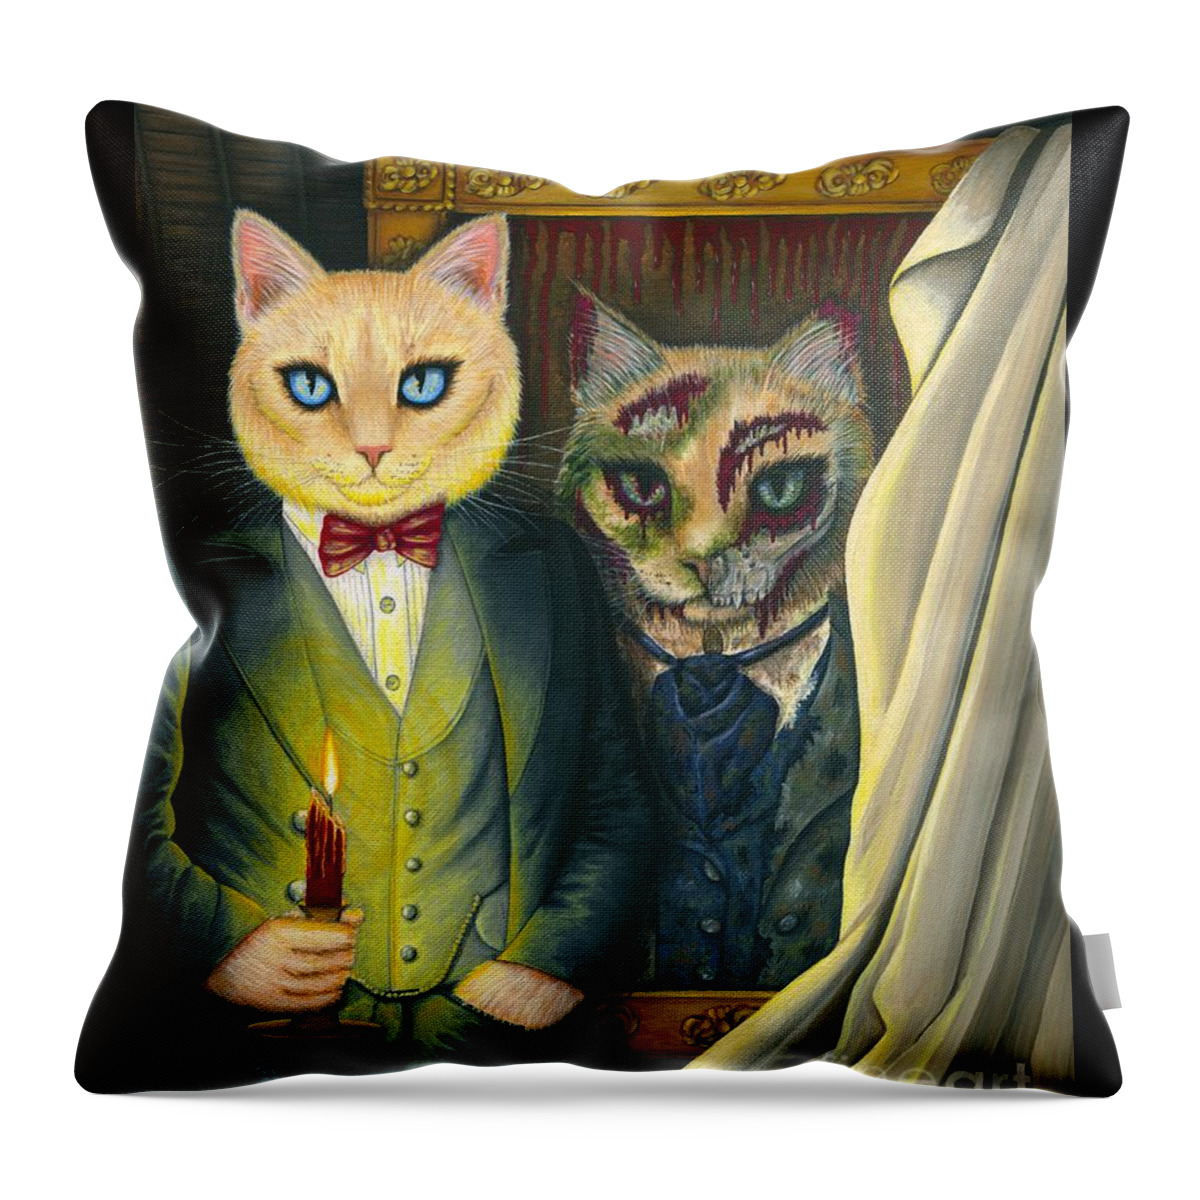 Dorian Gray Throw Pillow featuring the painting Dorian Gray as a Cat by Carrie Hawks